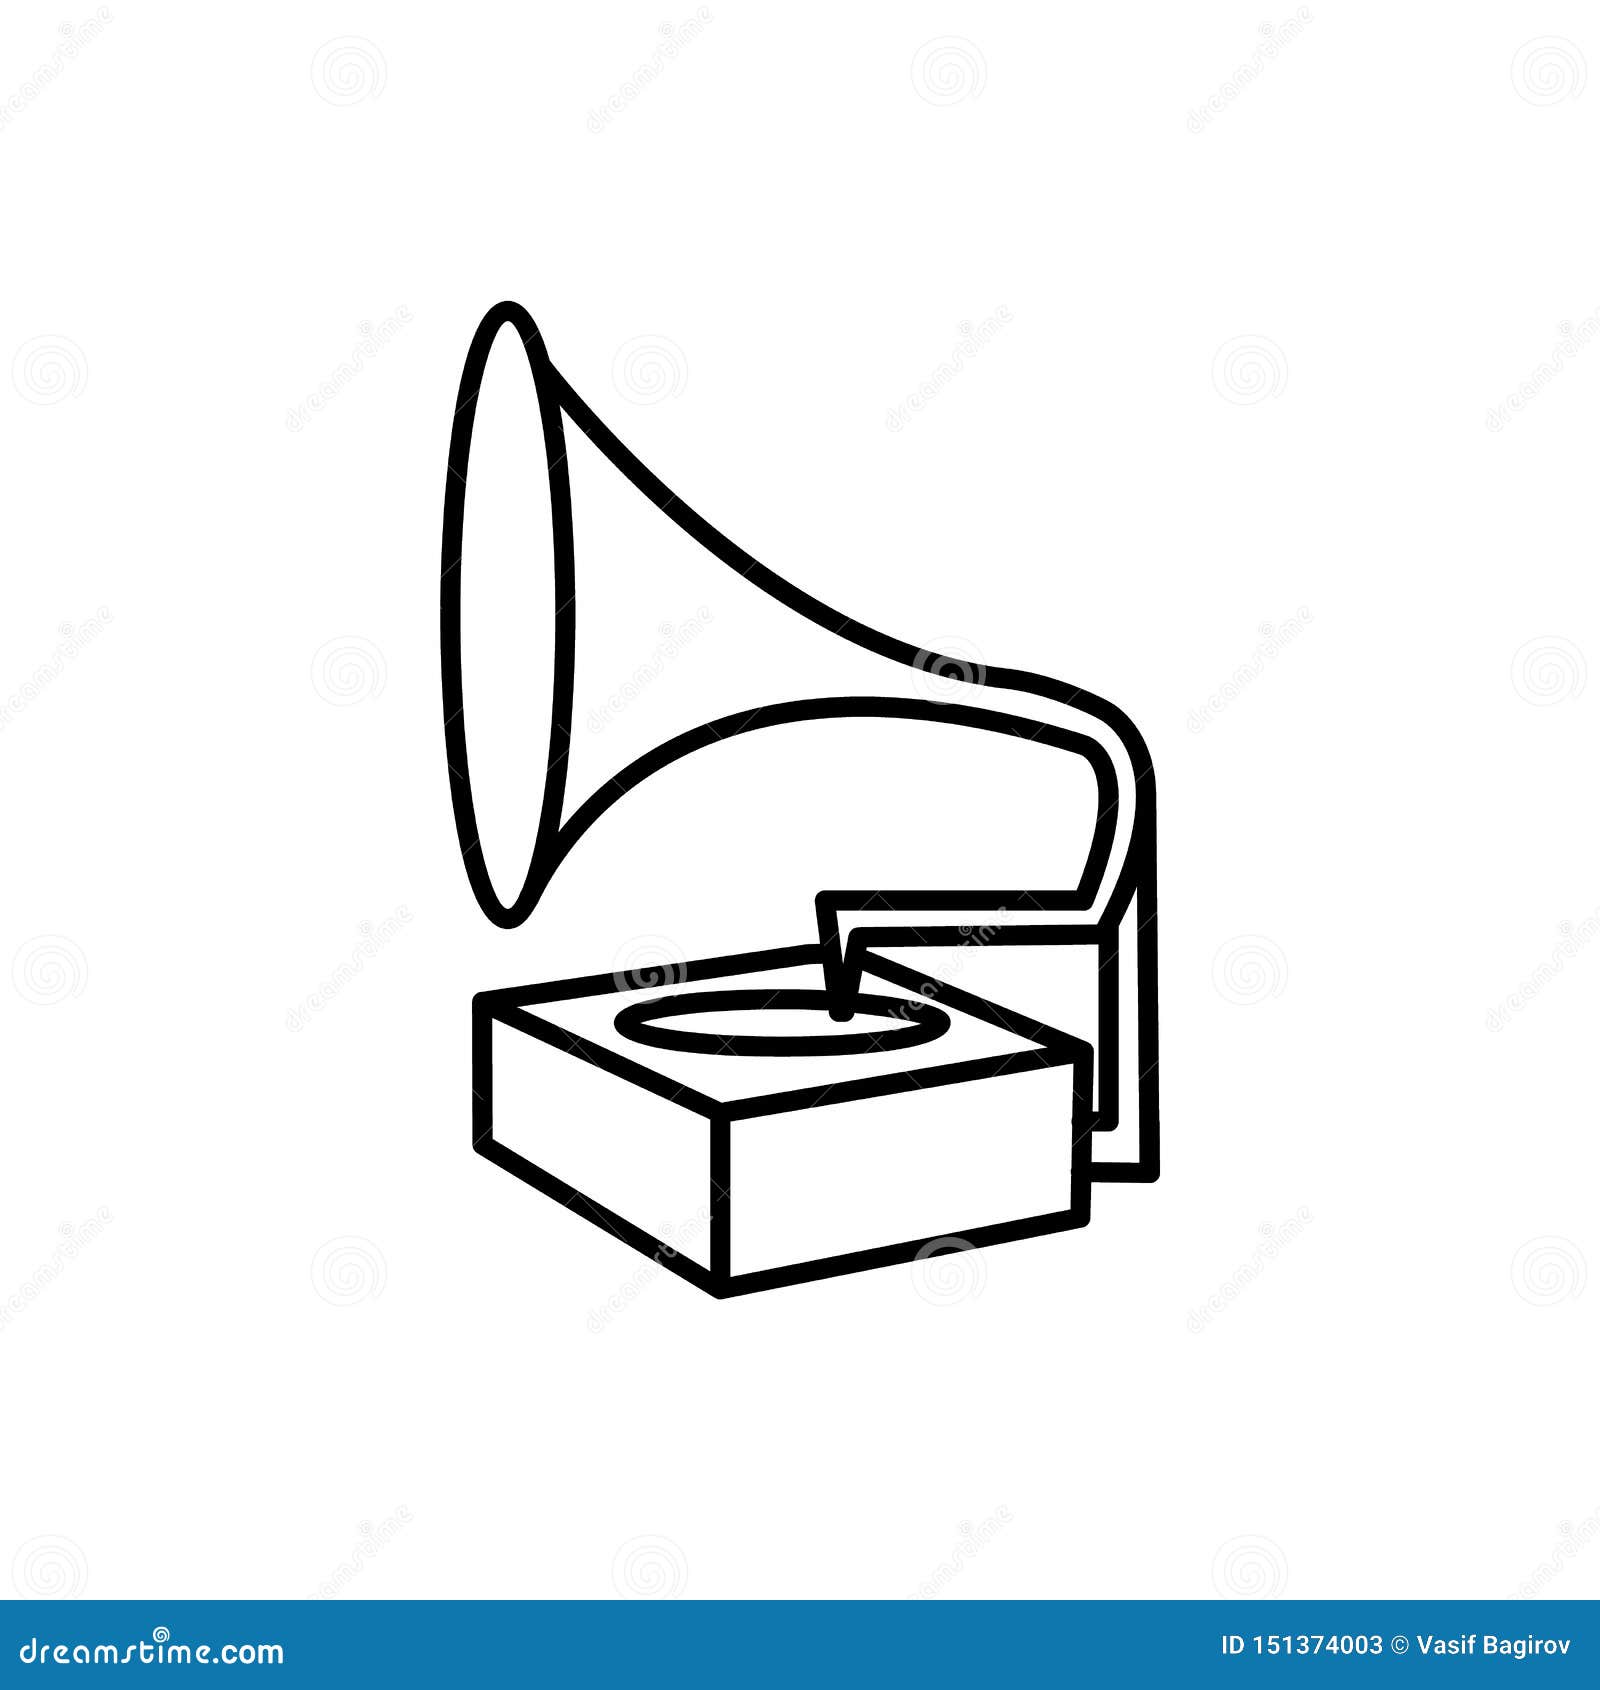 While Playing Record. Illustration Vector Icon Stock Illustration ...